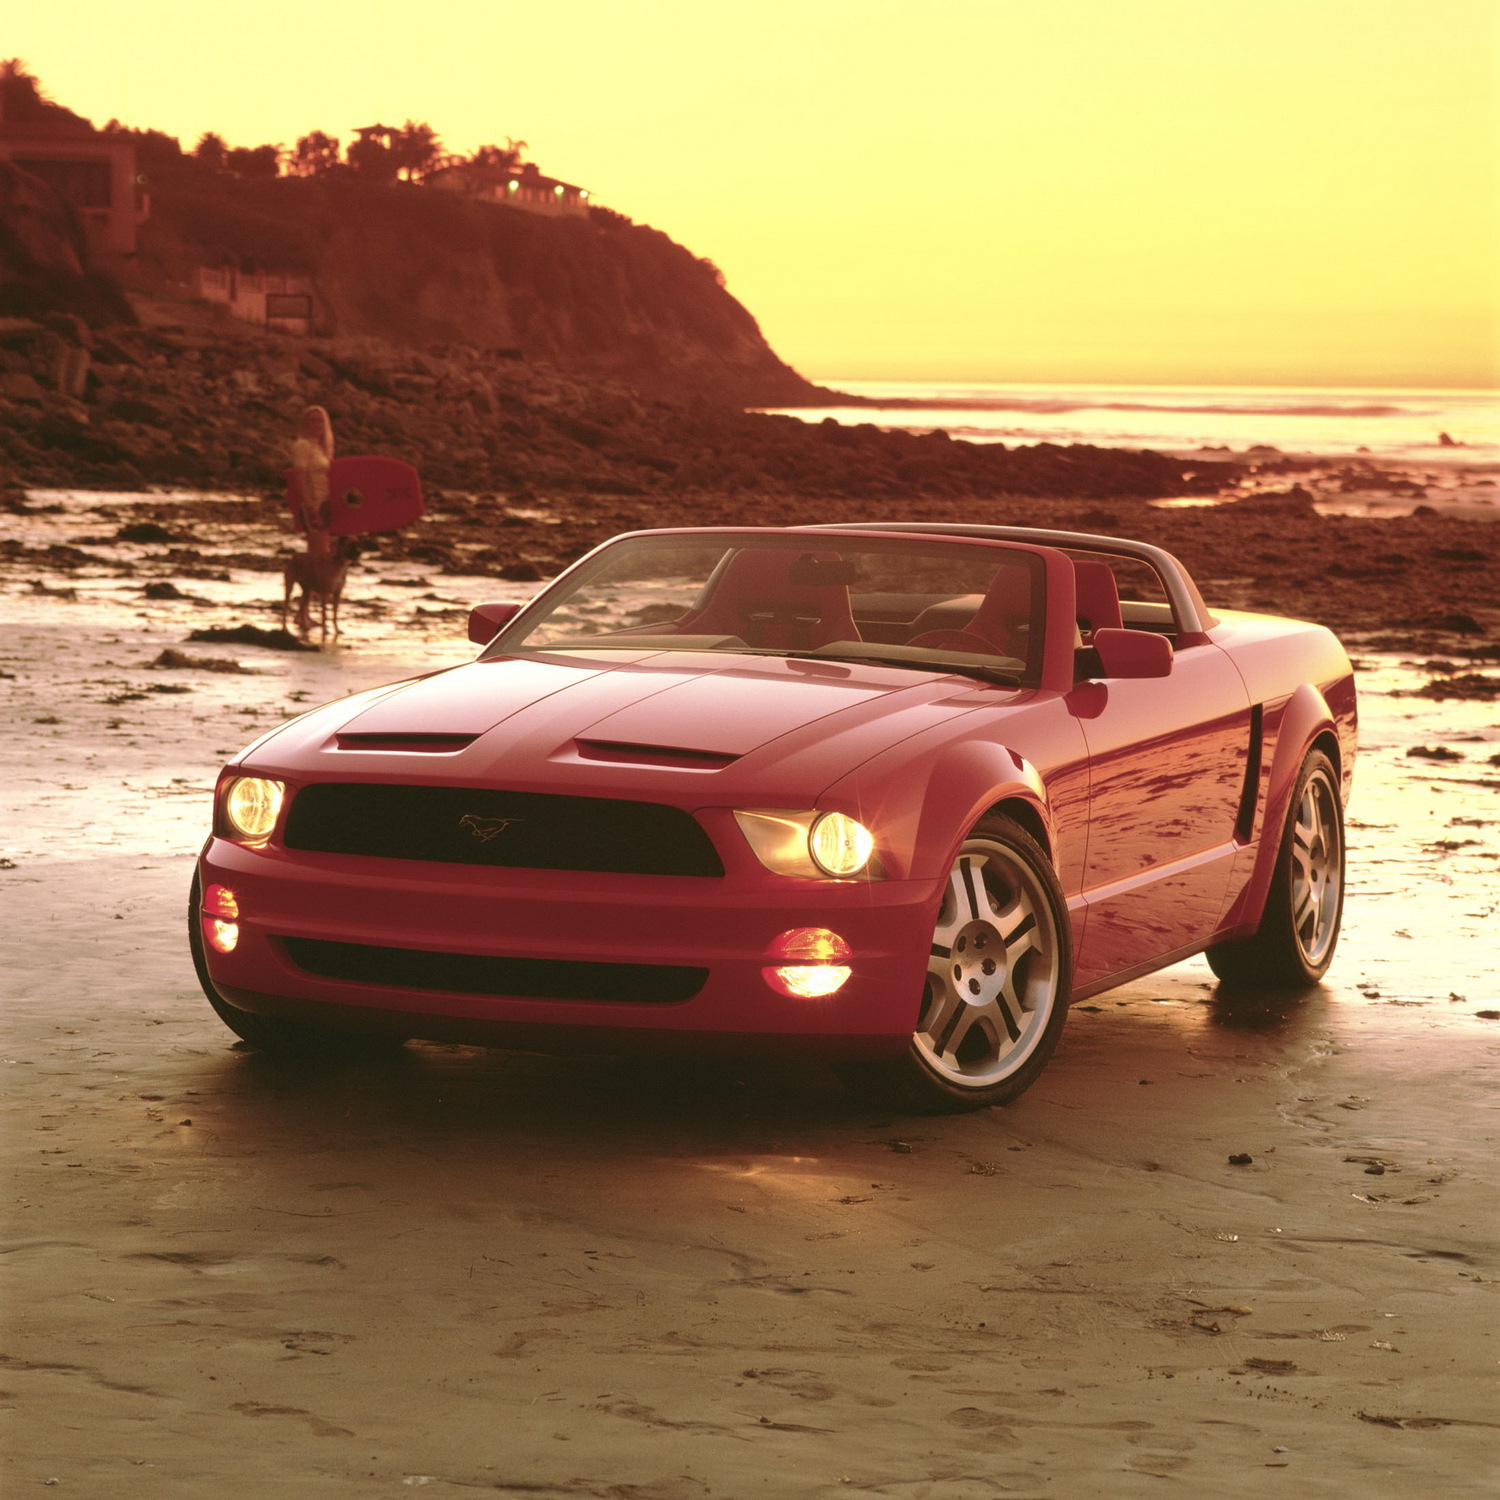 Automotive Car Magazine: Ford to Auction Mustang GT Concepts and First